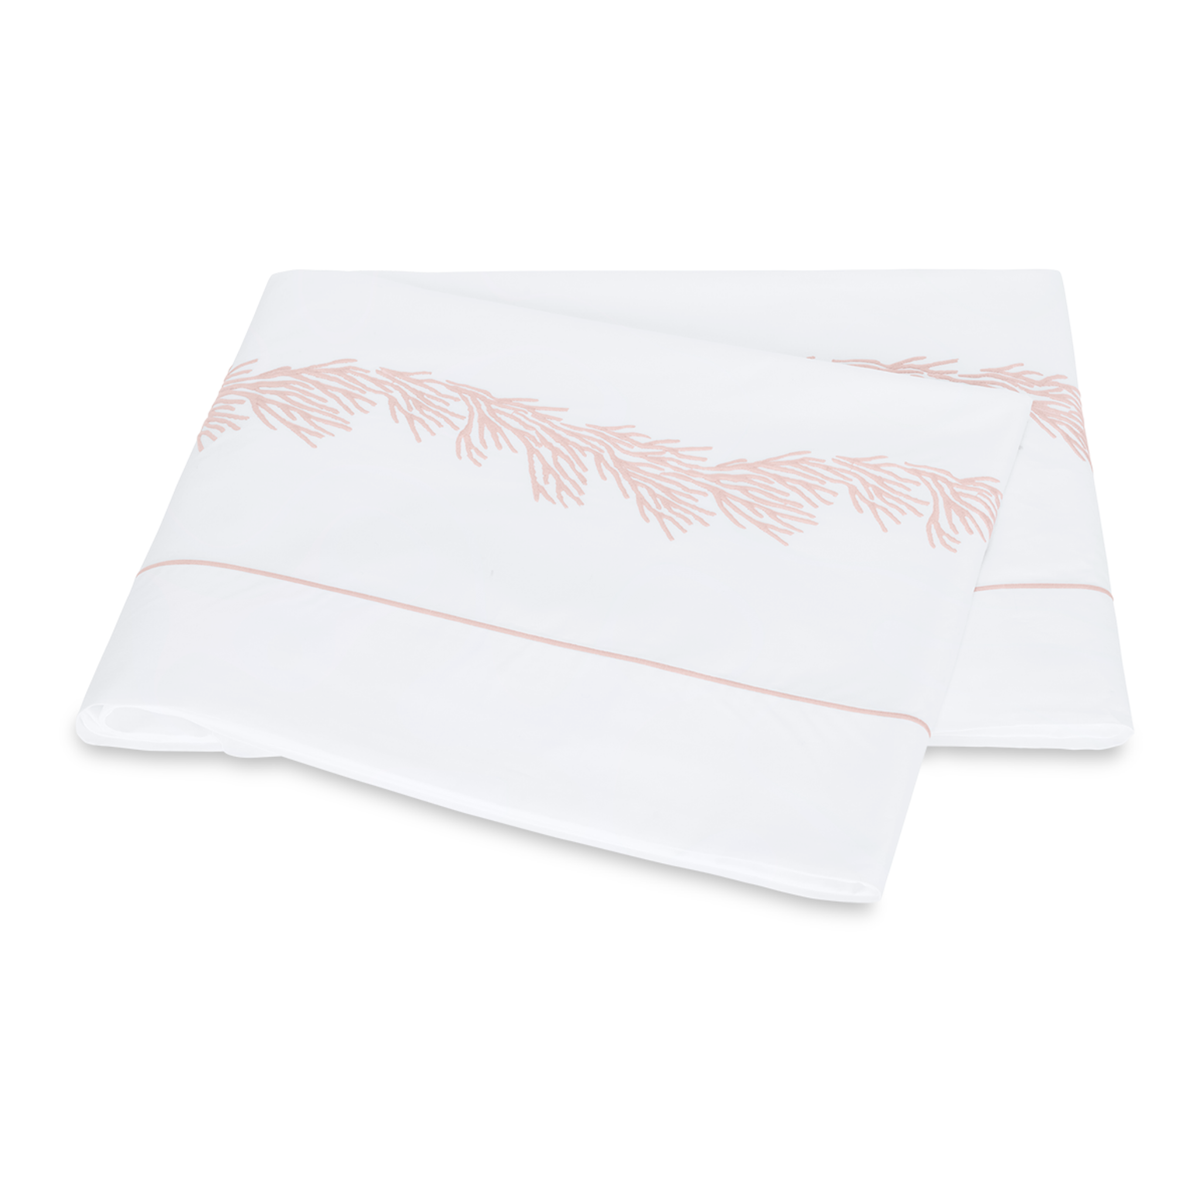 Folded Flat Sheet of Matouk Atoll Bedding Collection Blush Color